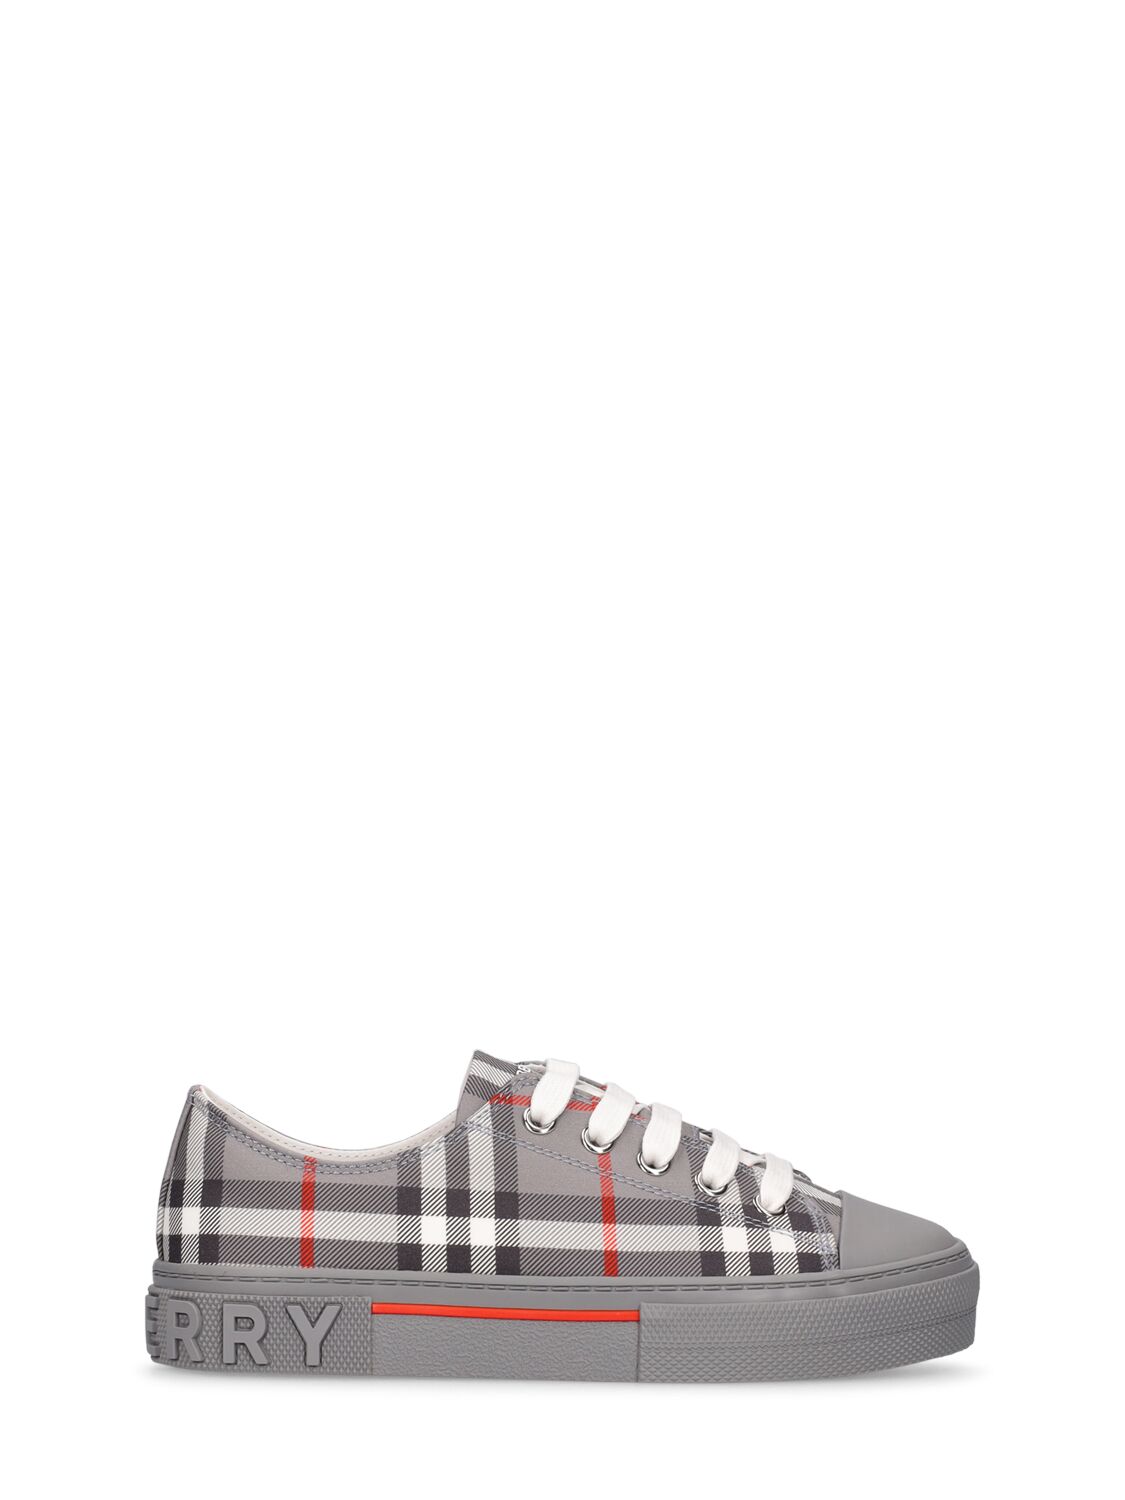 Burberry Kids' Check Print Cotton Lace-up Trainers